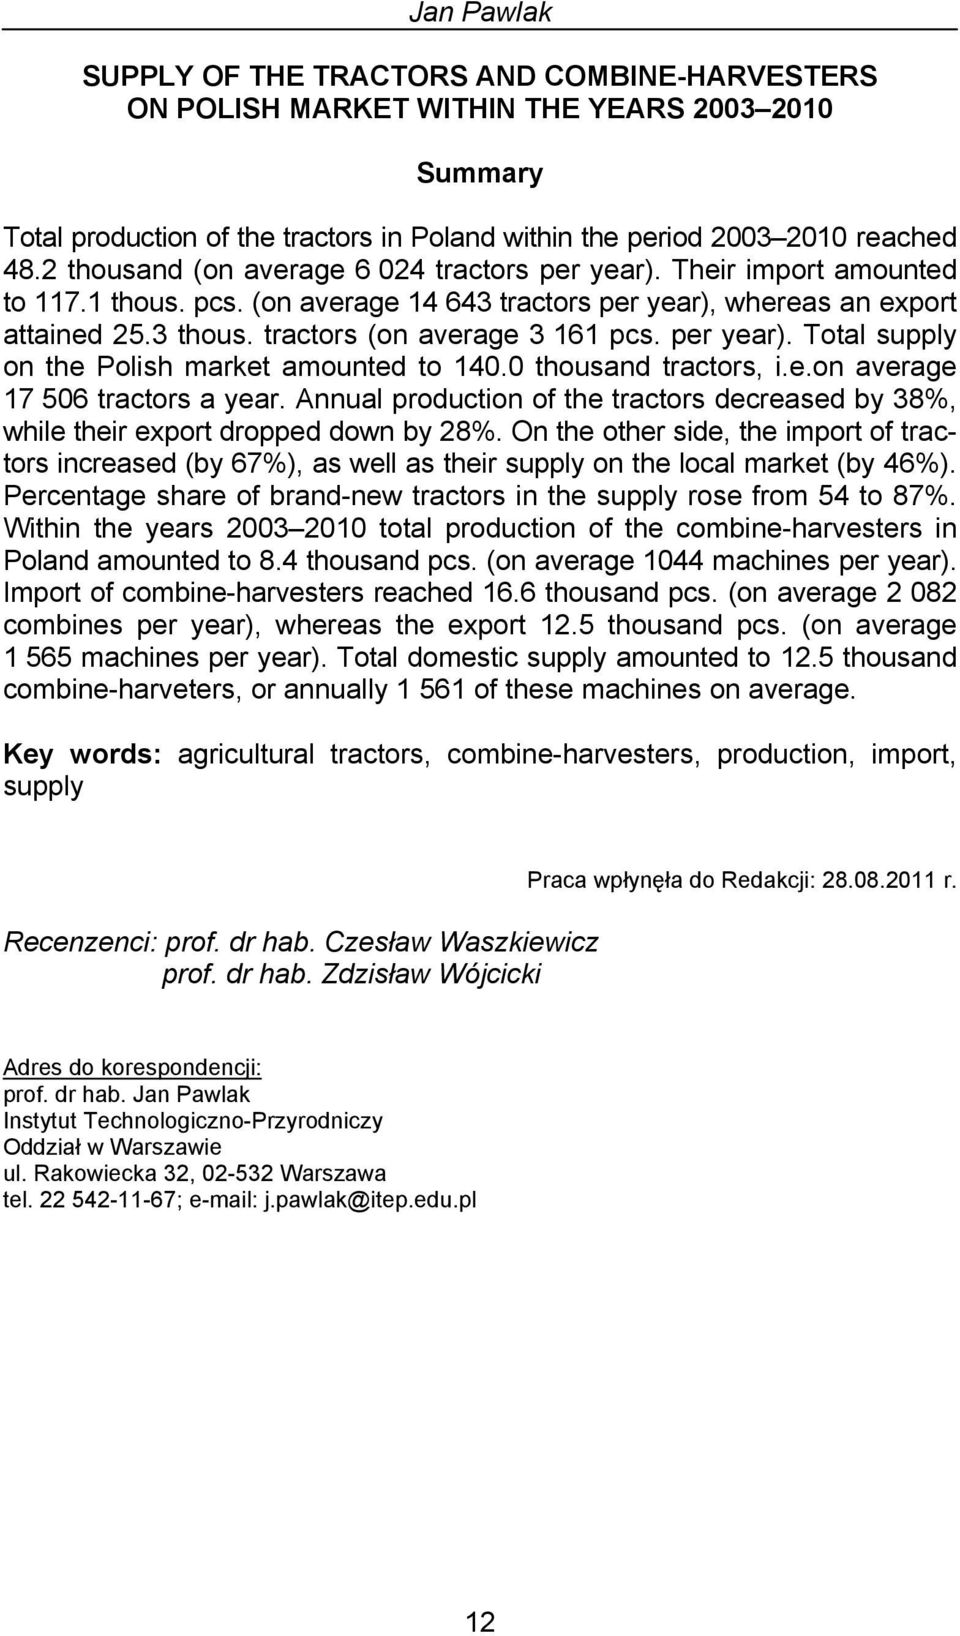 tractors (on average 3 161 pcs. per year). Total supply on the Polish market amounted to 140.0 thousand tractors, i.e.on average 17 506 tractors a year.